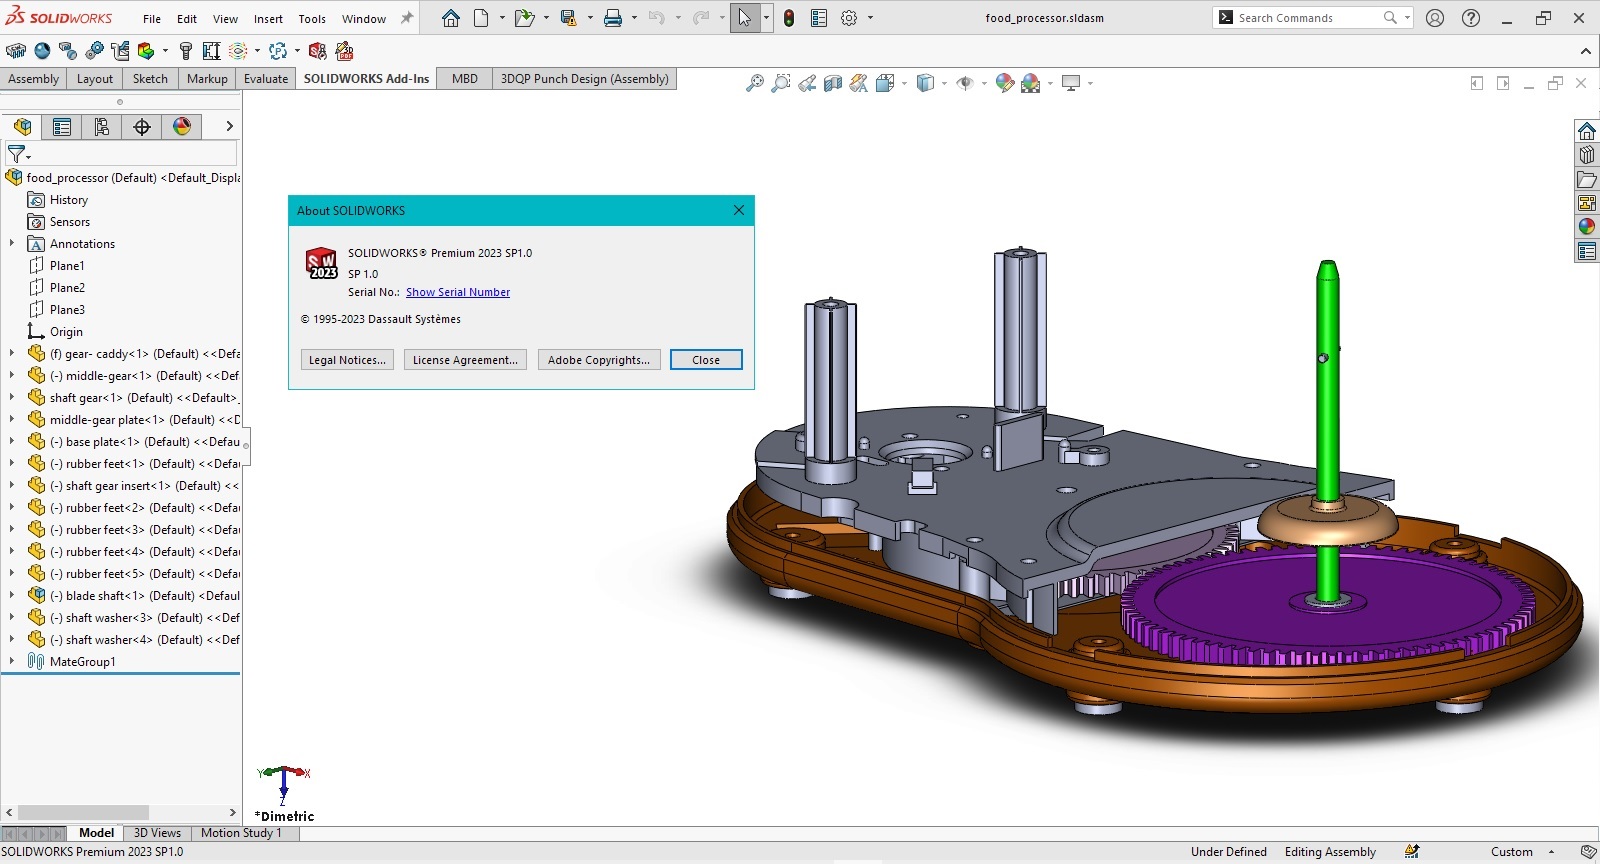 Working with SolidWorks 2023 SP1.0 full license